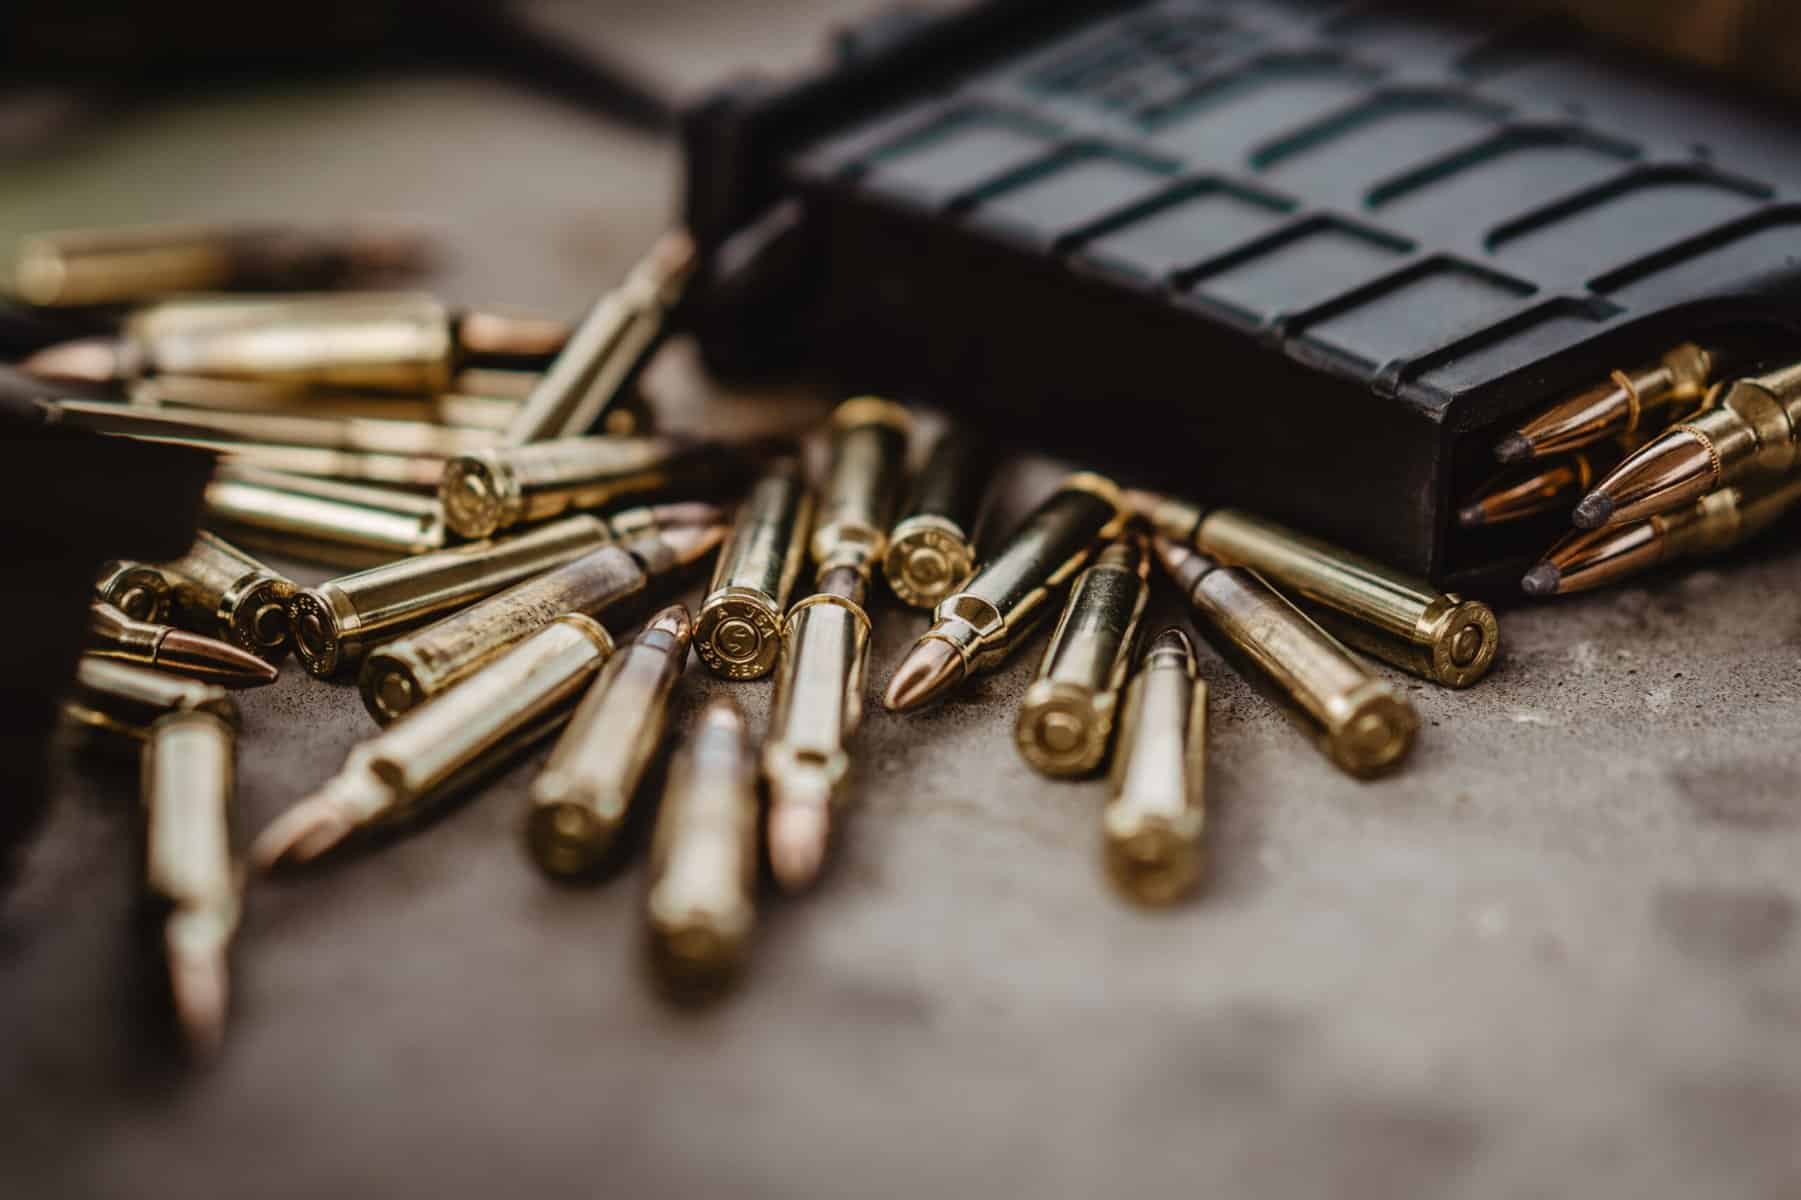 A collection of bullets is shown.